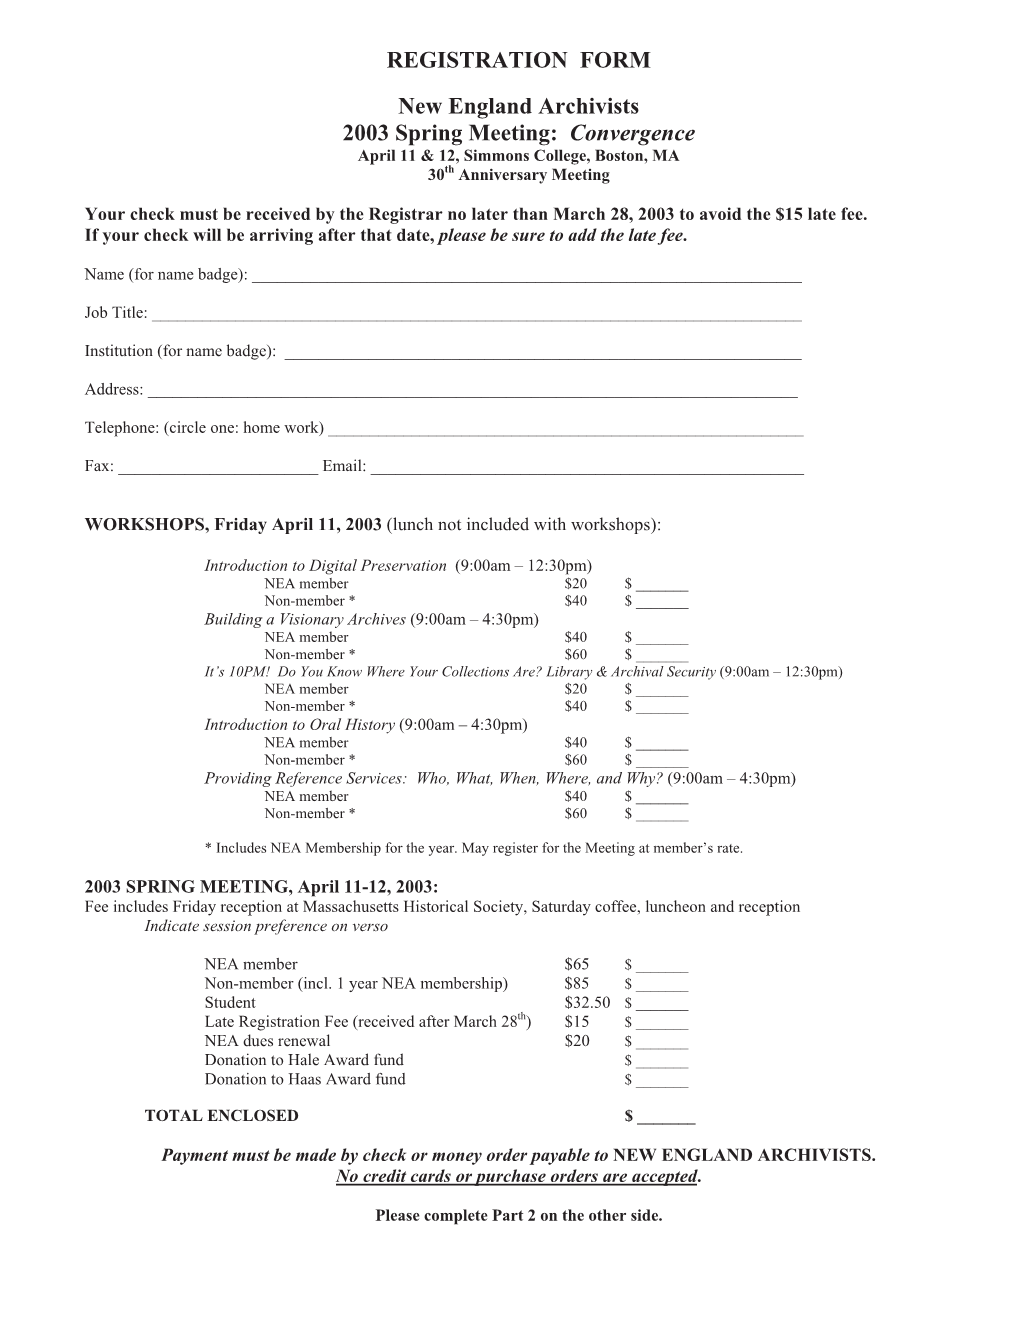 REGISTRATION FORM New England Archivists 2003 Spring Meeting